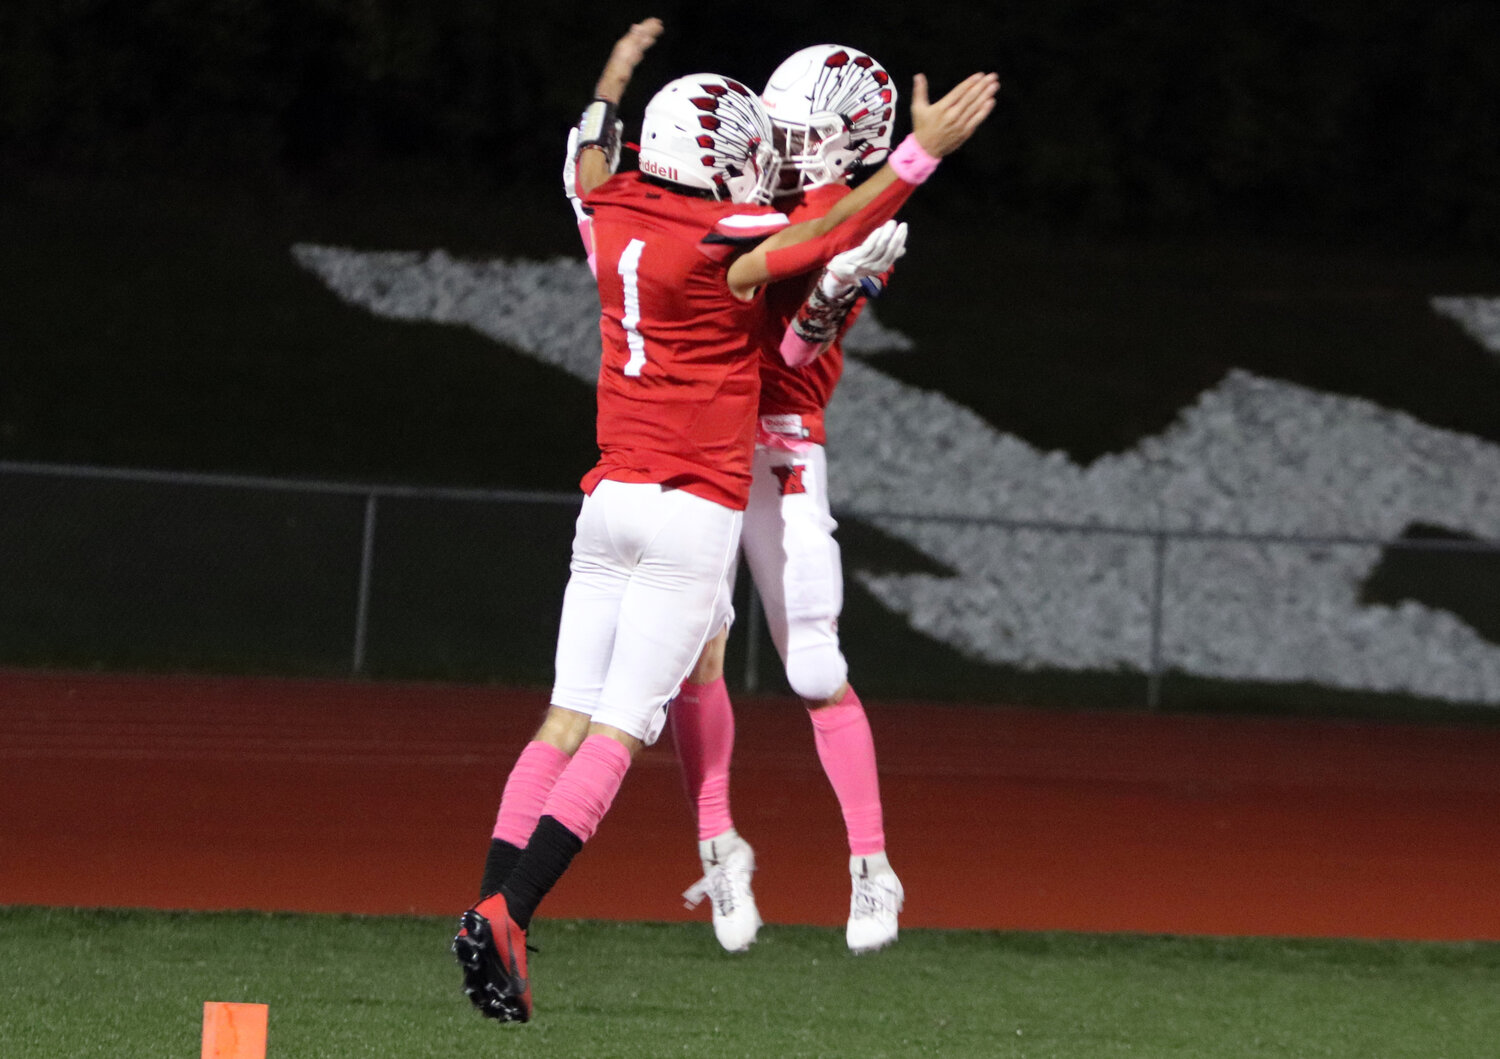 Charlie Blondin (left) celebrates with Mason Thompson after Blondin scored a touchdown.